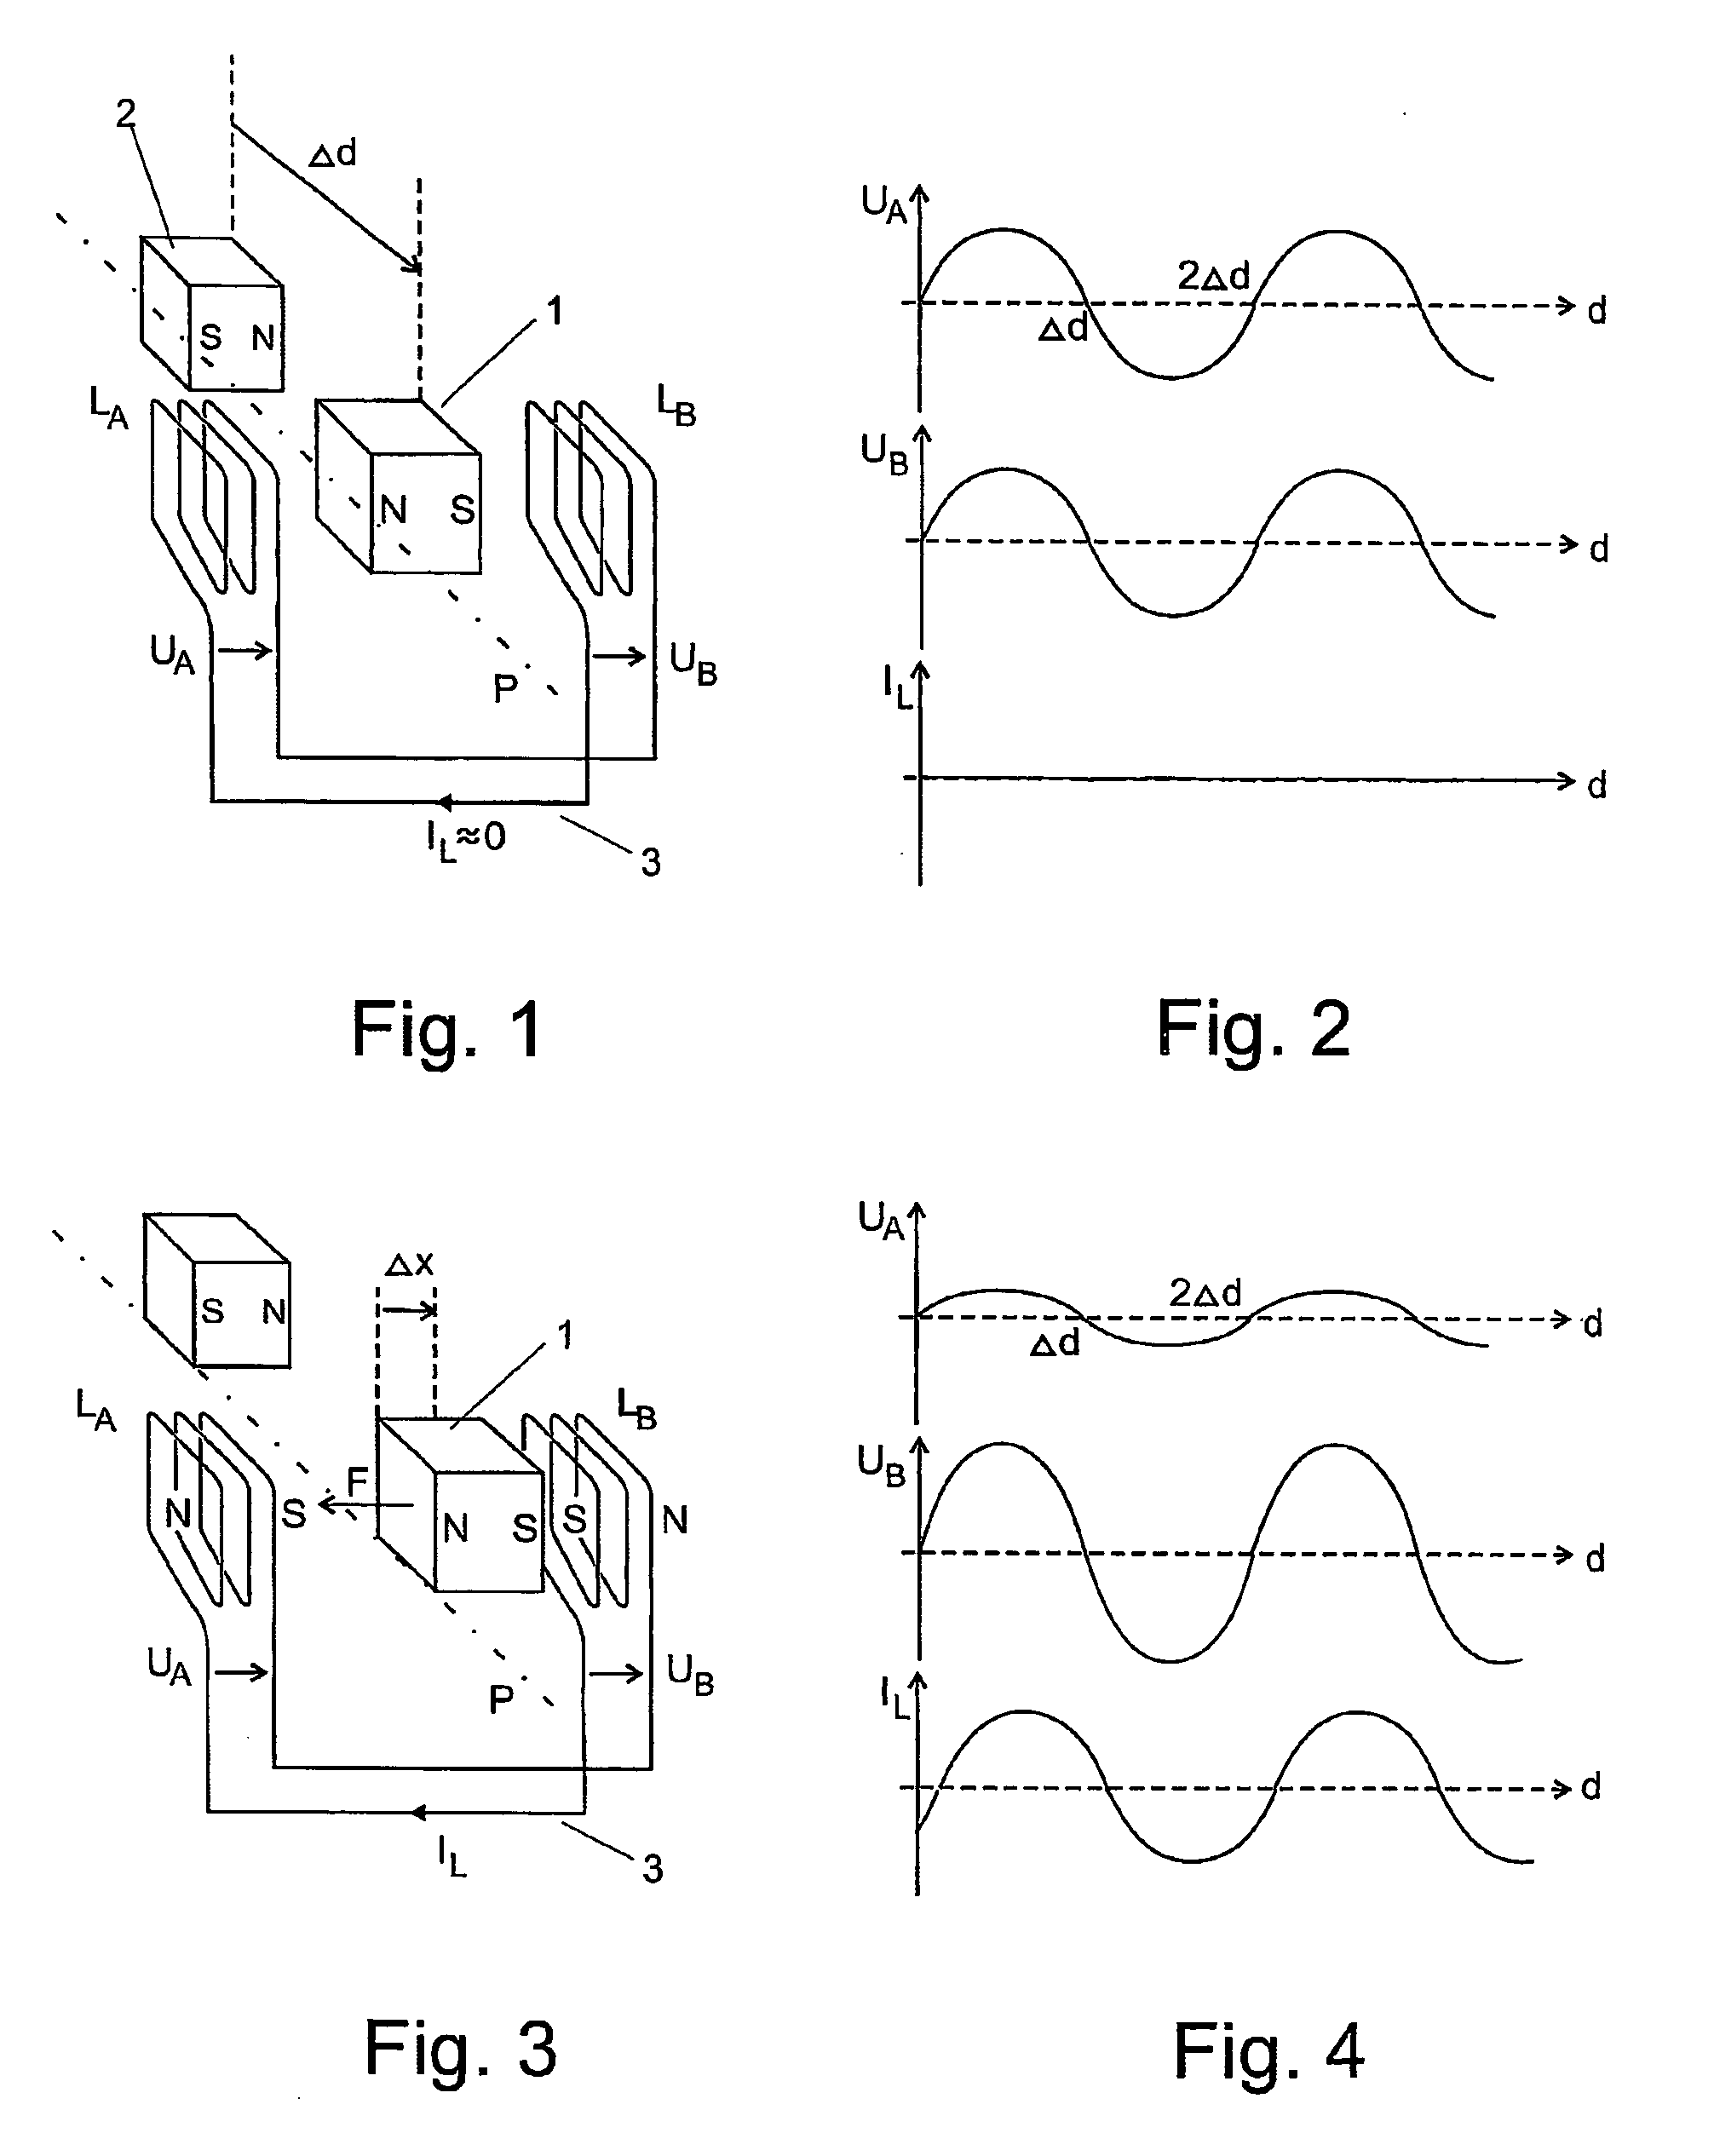 Passive dynamically stabilizing magnetic bearing and drive unit